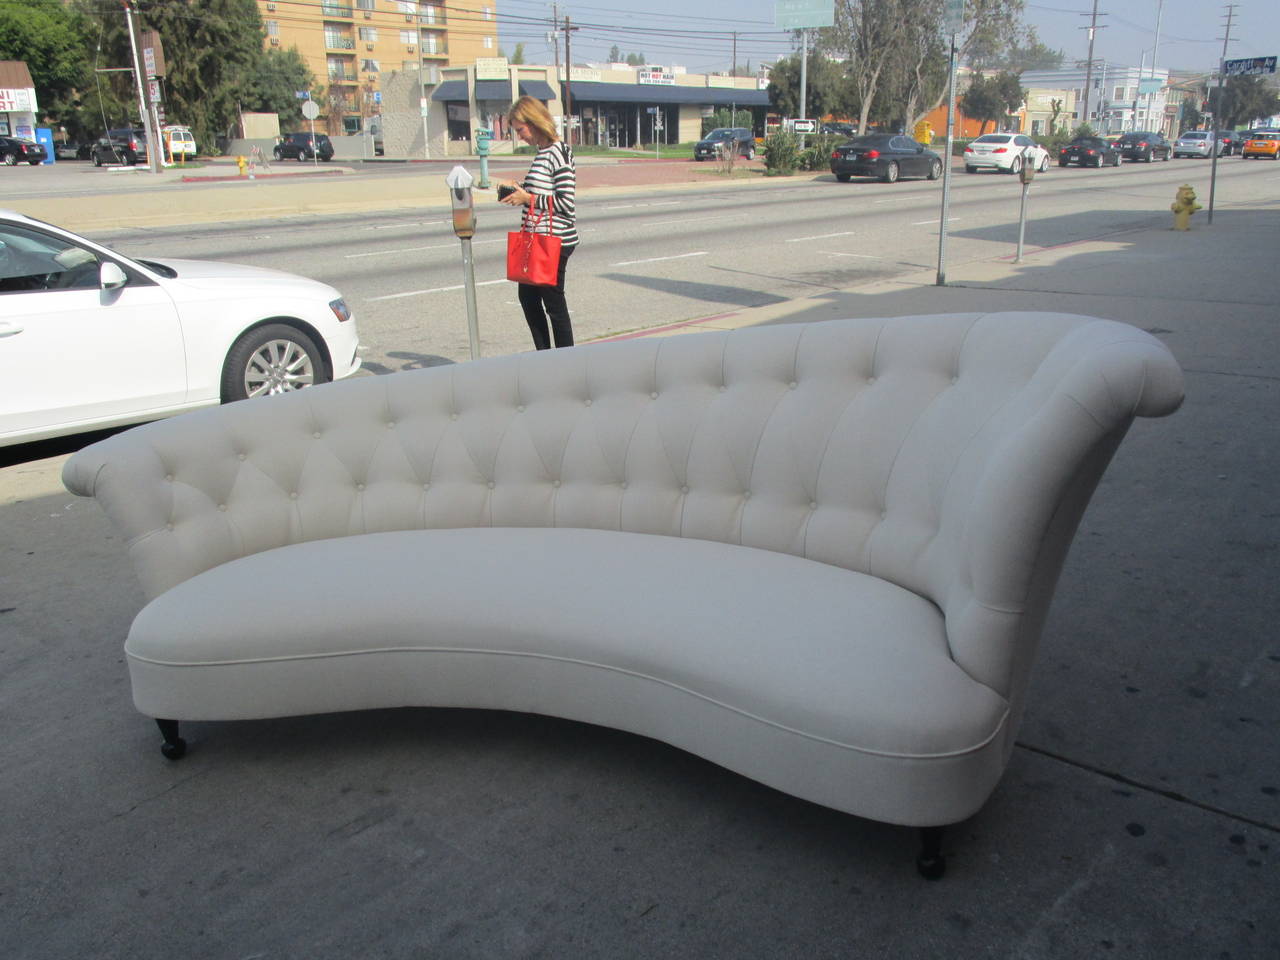 A glamorous Hollywood Regency sofa with a unique asymmetrical frame. The elegant white upholstery and black feet on this piece downplays the ornate shape and tufting of the backrest, increasing its versatility.
Measures: The height of the lower arm